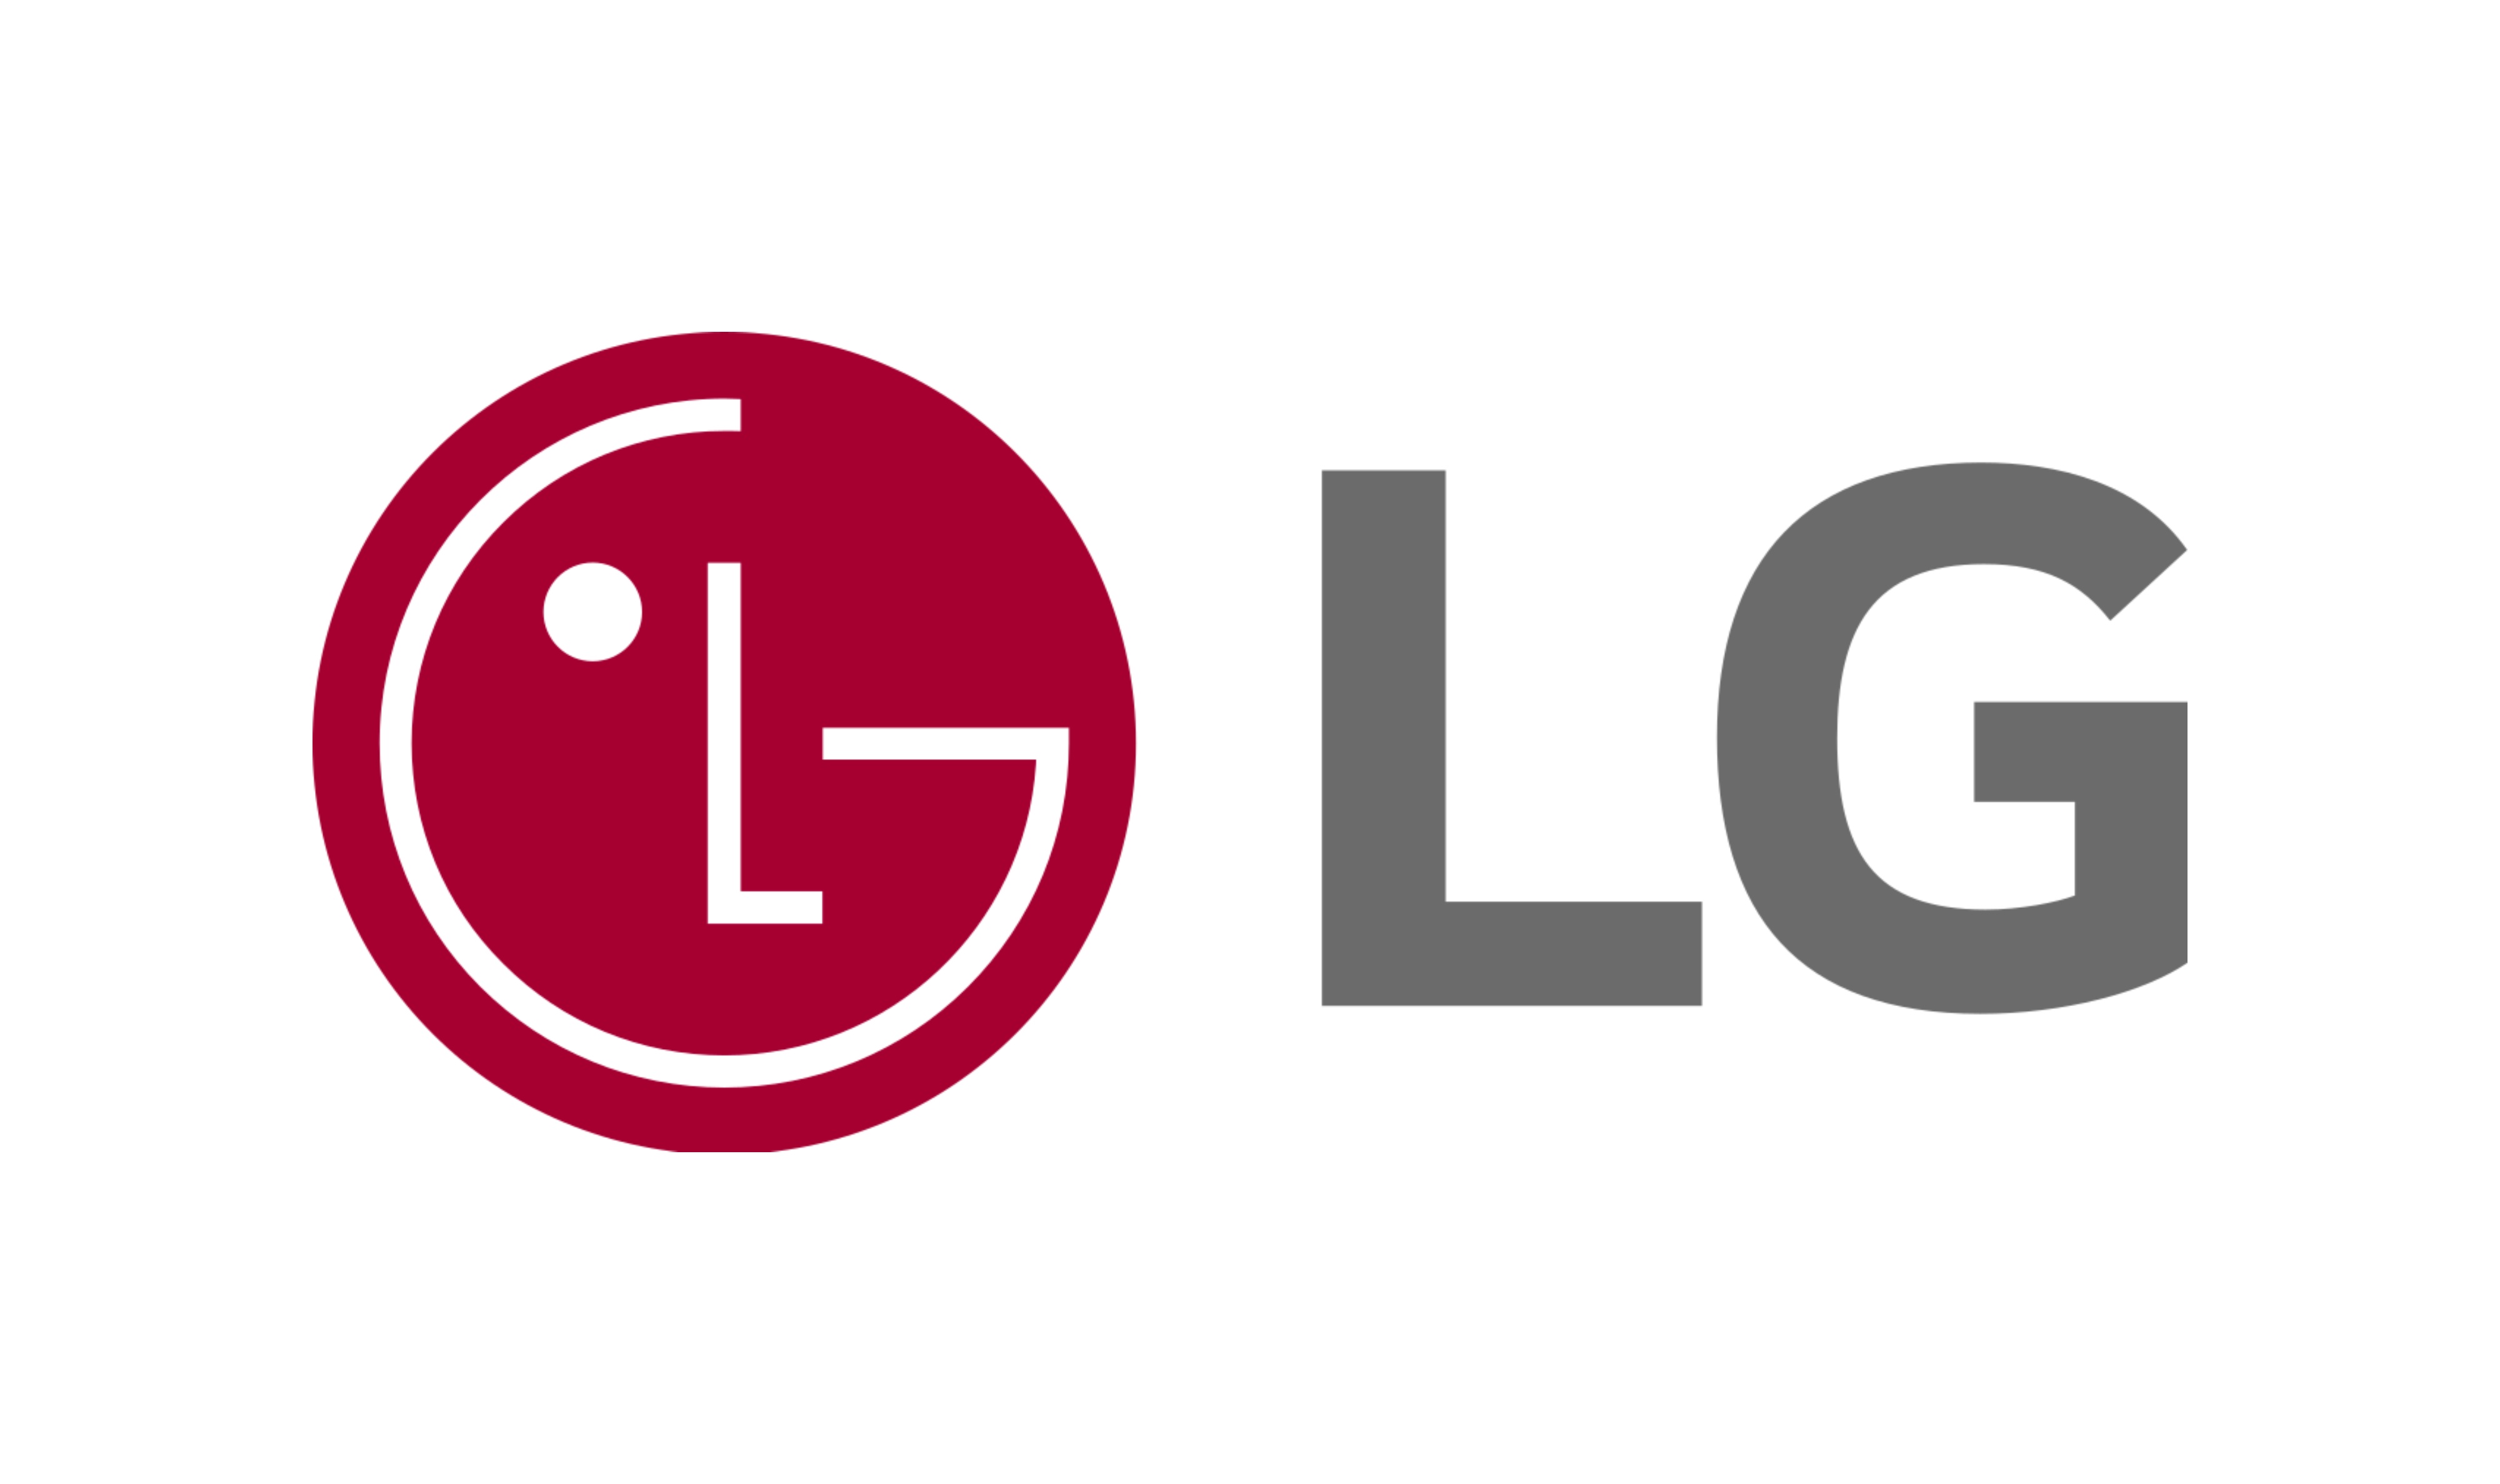 LG Logo Featured